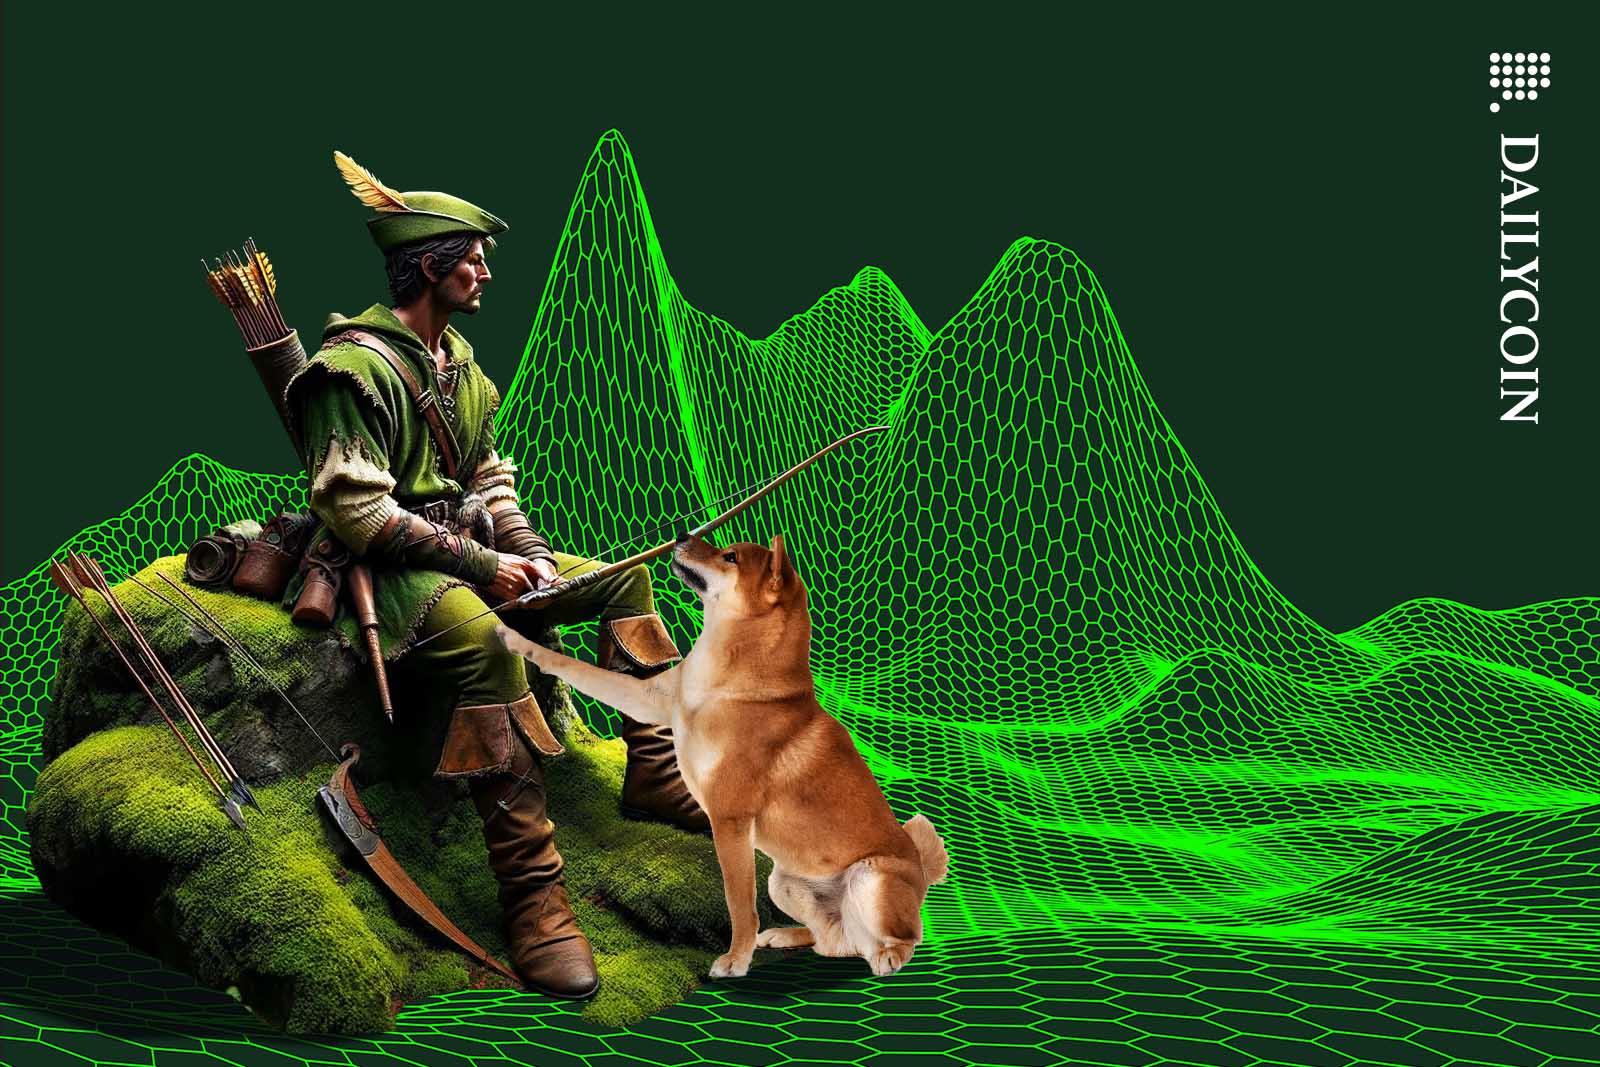 Sad Robin Hood sitting on a rock being approached by a Shiba Inu.